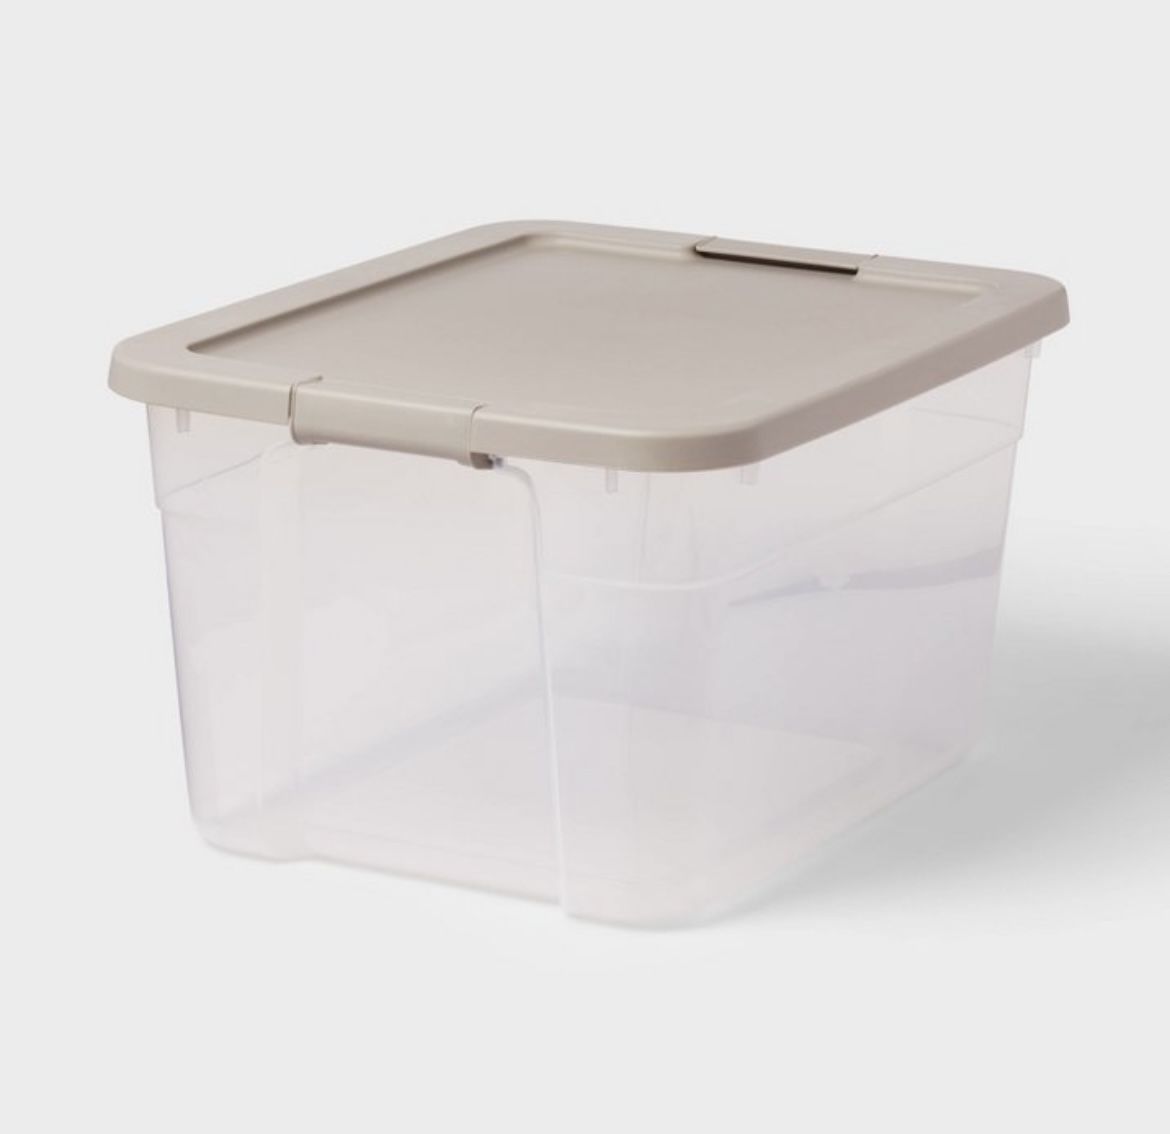 Sterilite Clear Storage Box with Latches and Gray Lid